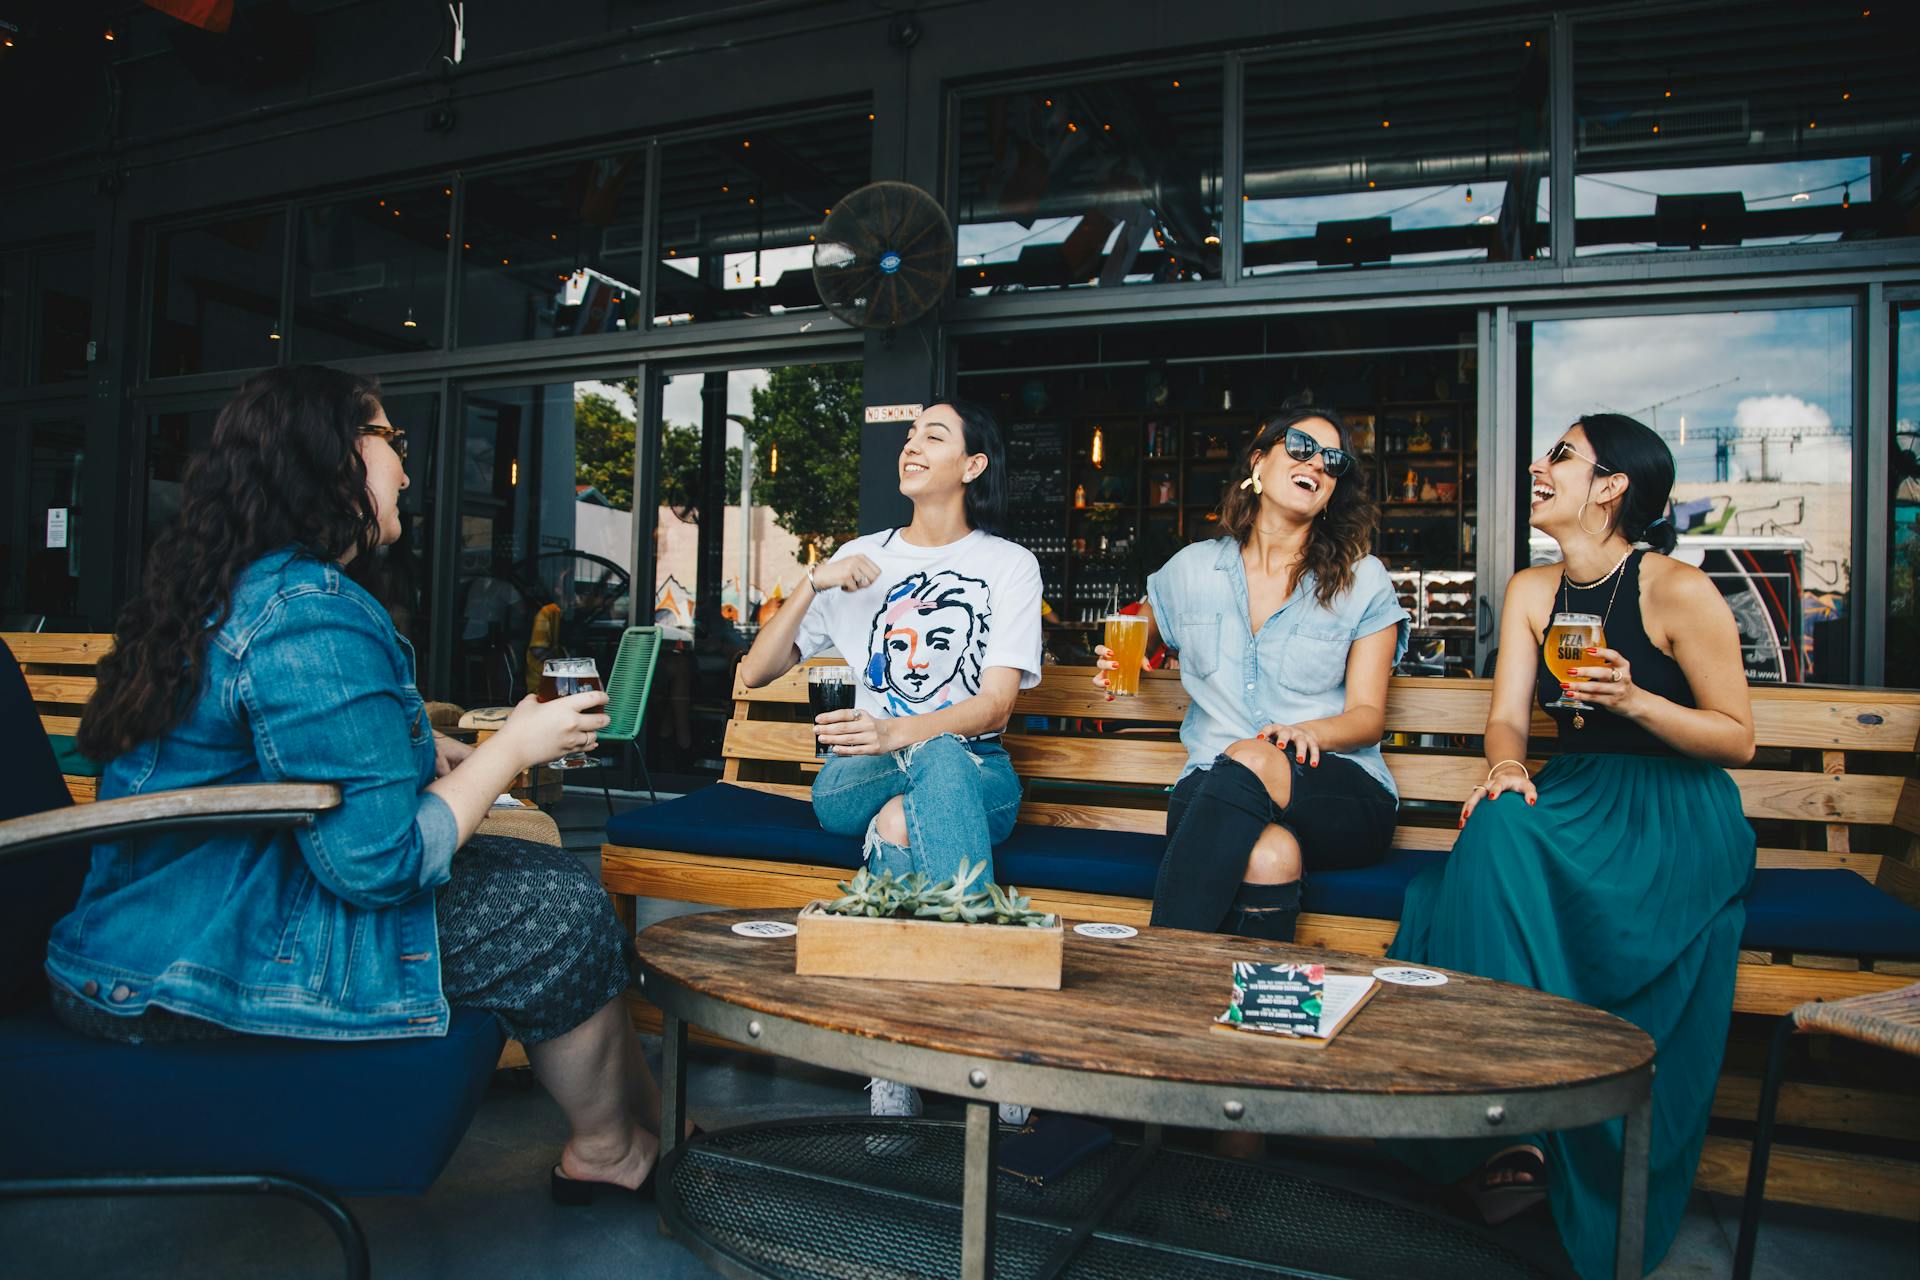 A group of friends sitting together | Source: Pexels